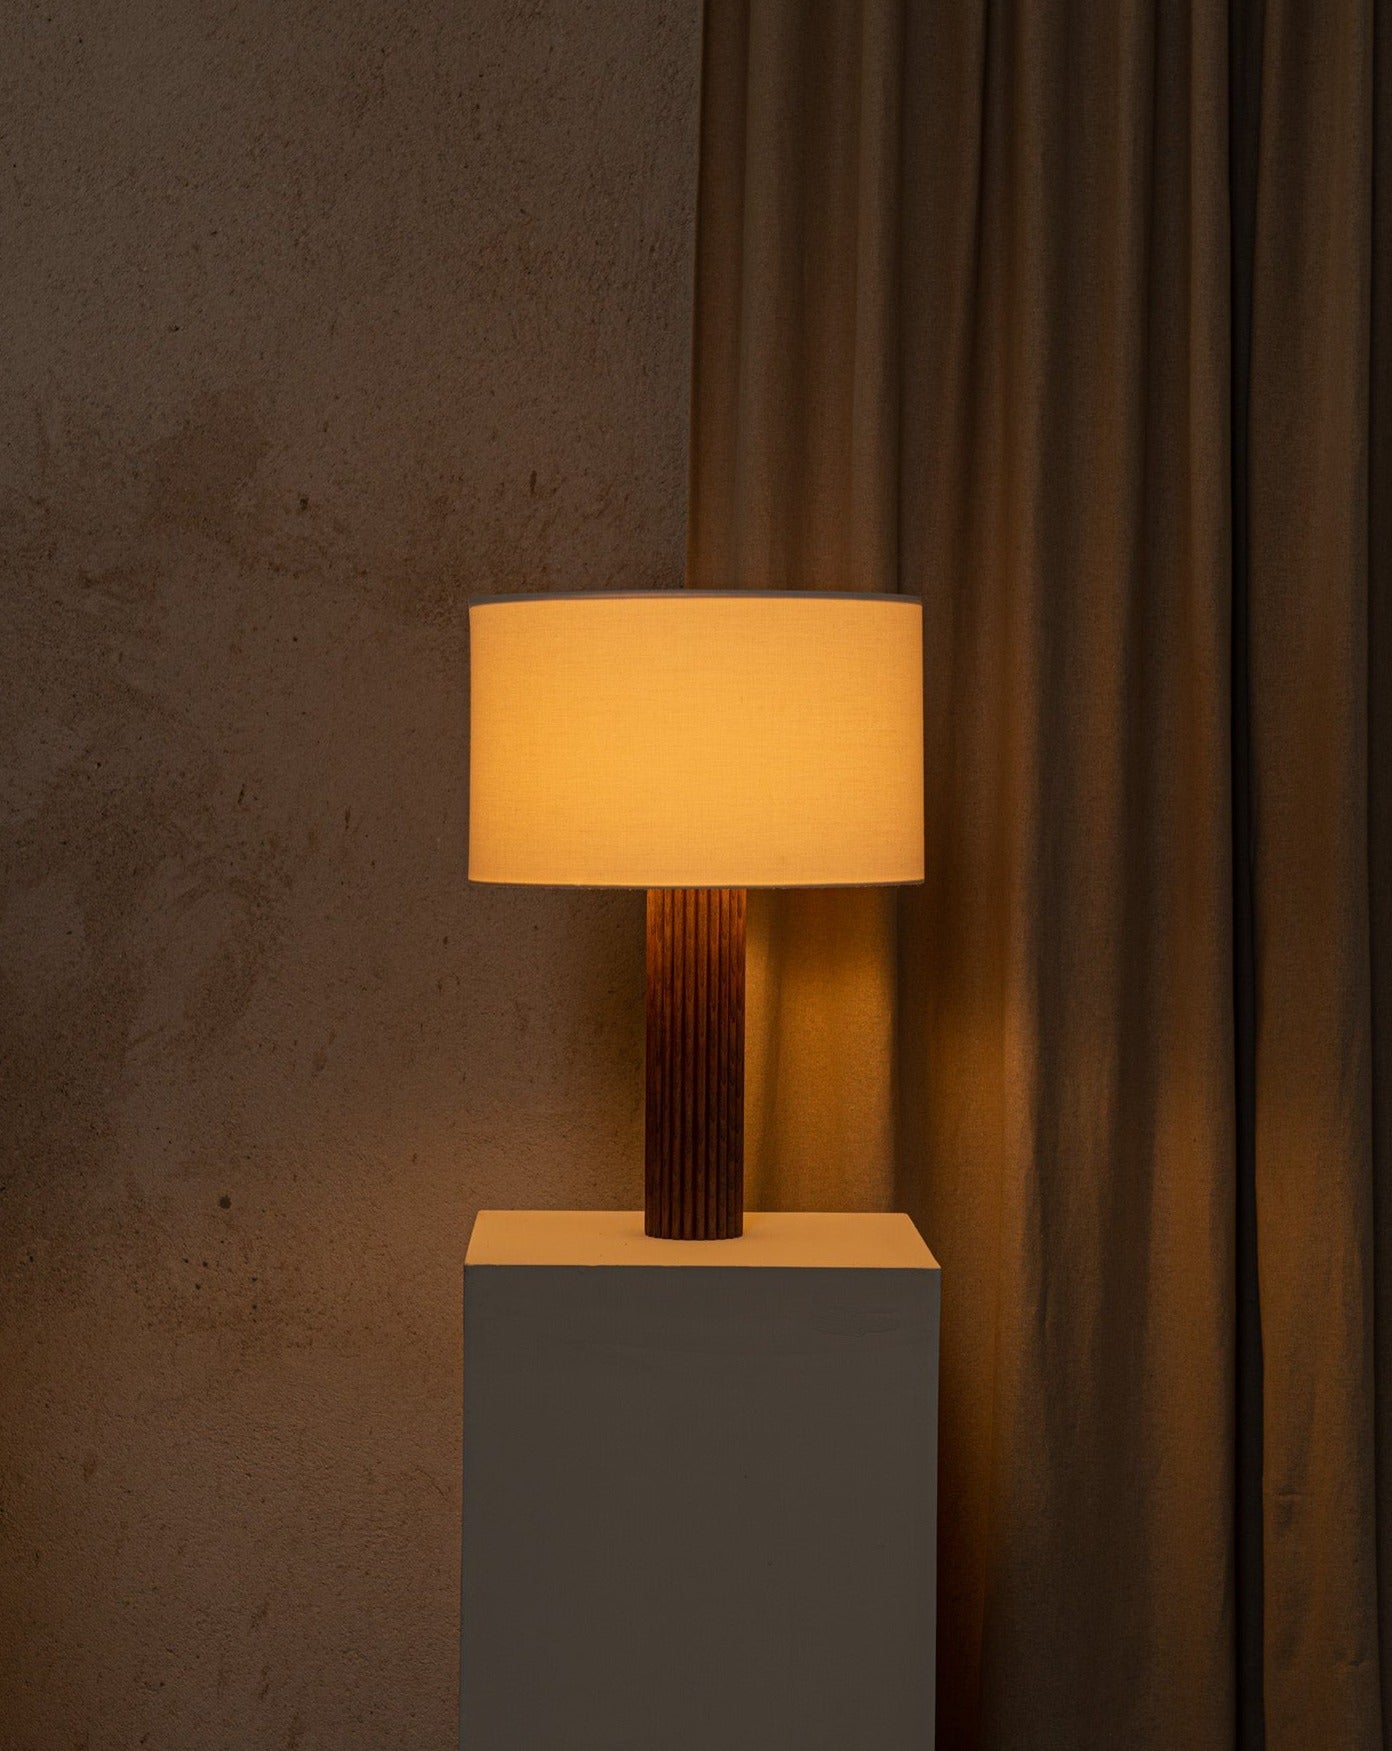 Shop Dessein Parke Simone and Marcel Fluta wooden table lamp with cotton shade